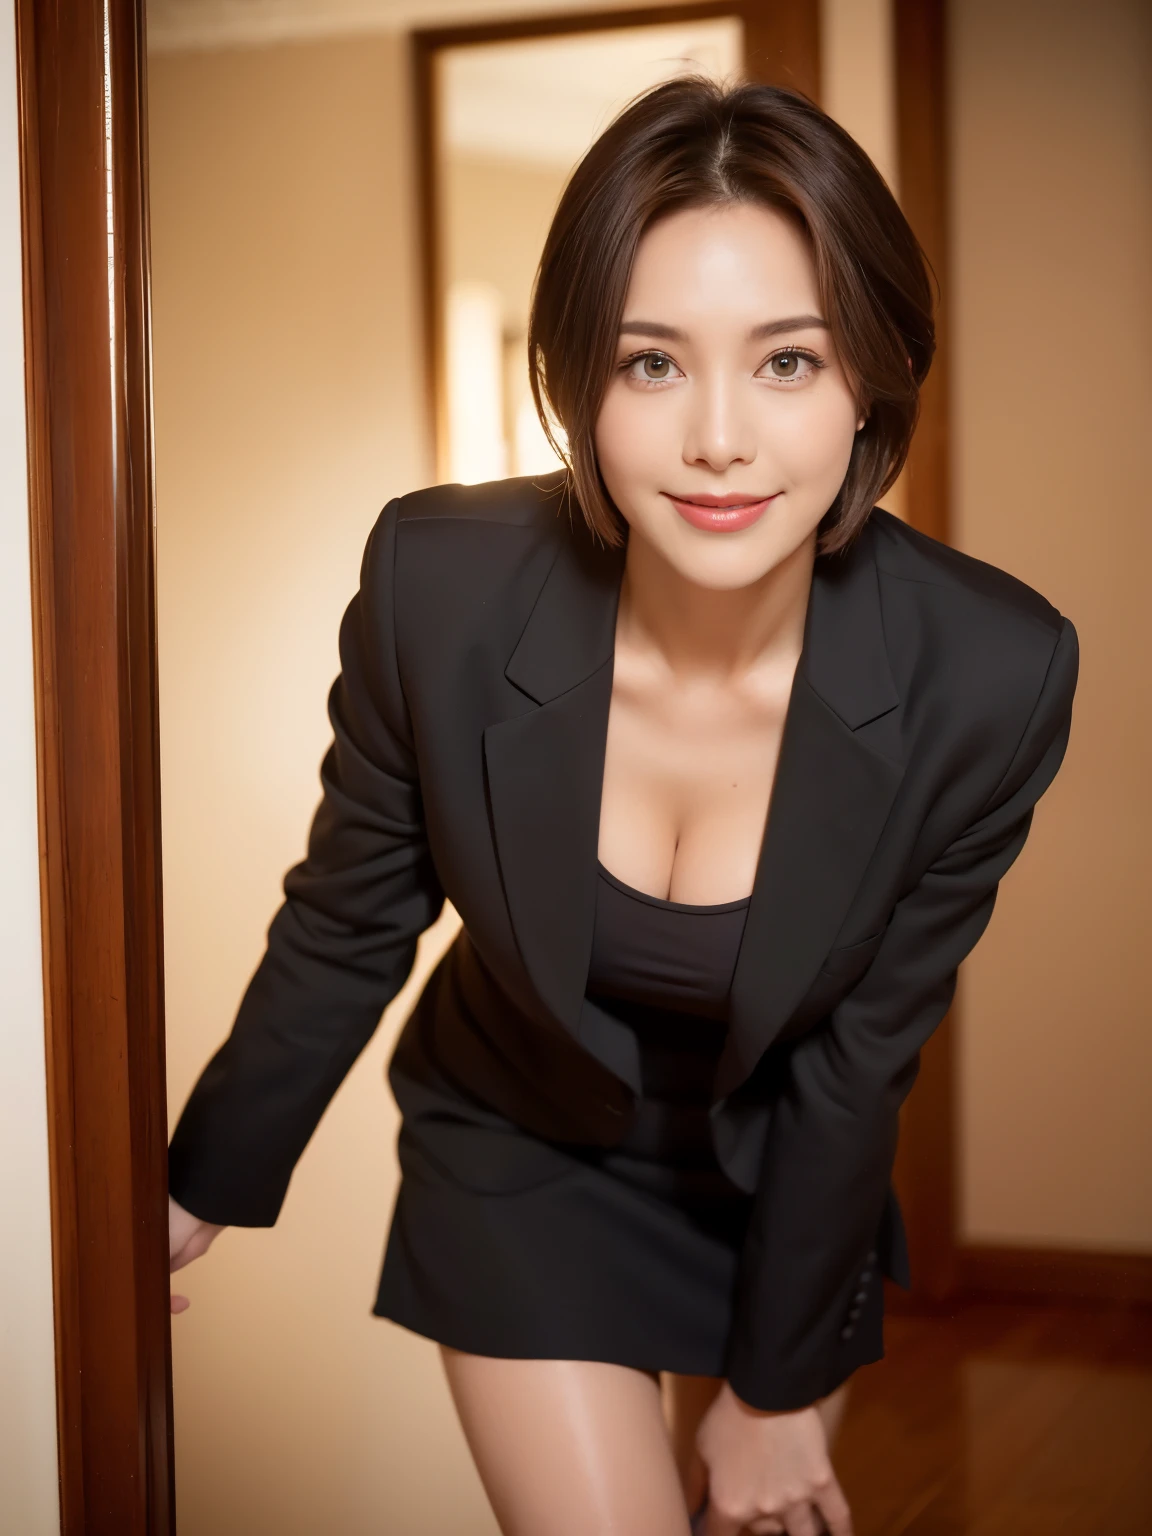 masterpiece,highest quality, (1 milf、42 years old), ((close:0.5)), ((Cross Arm)), glare, gray blazer, white shirt, double eyelid, eyelash, lip gloss, (smile:1), ((close your eyes:0.85)), ((looking at the viewer、The whole body is reflected、Are standing)), to be born, (From above:0.2), ((no one)), （office）、（knee length、knee high boots）、Depth of written boundary、尖ったred mouth、(reddish brown wet shiny short hair,,,,,,,,,),red mouth,clavicle、full body portrait、digital illustration, (Photoreal:1.3),(Raw photo.)